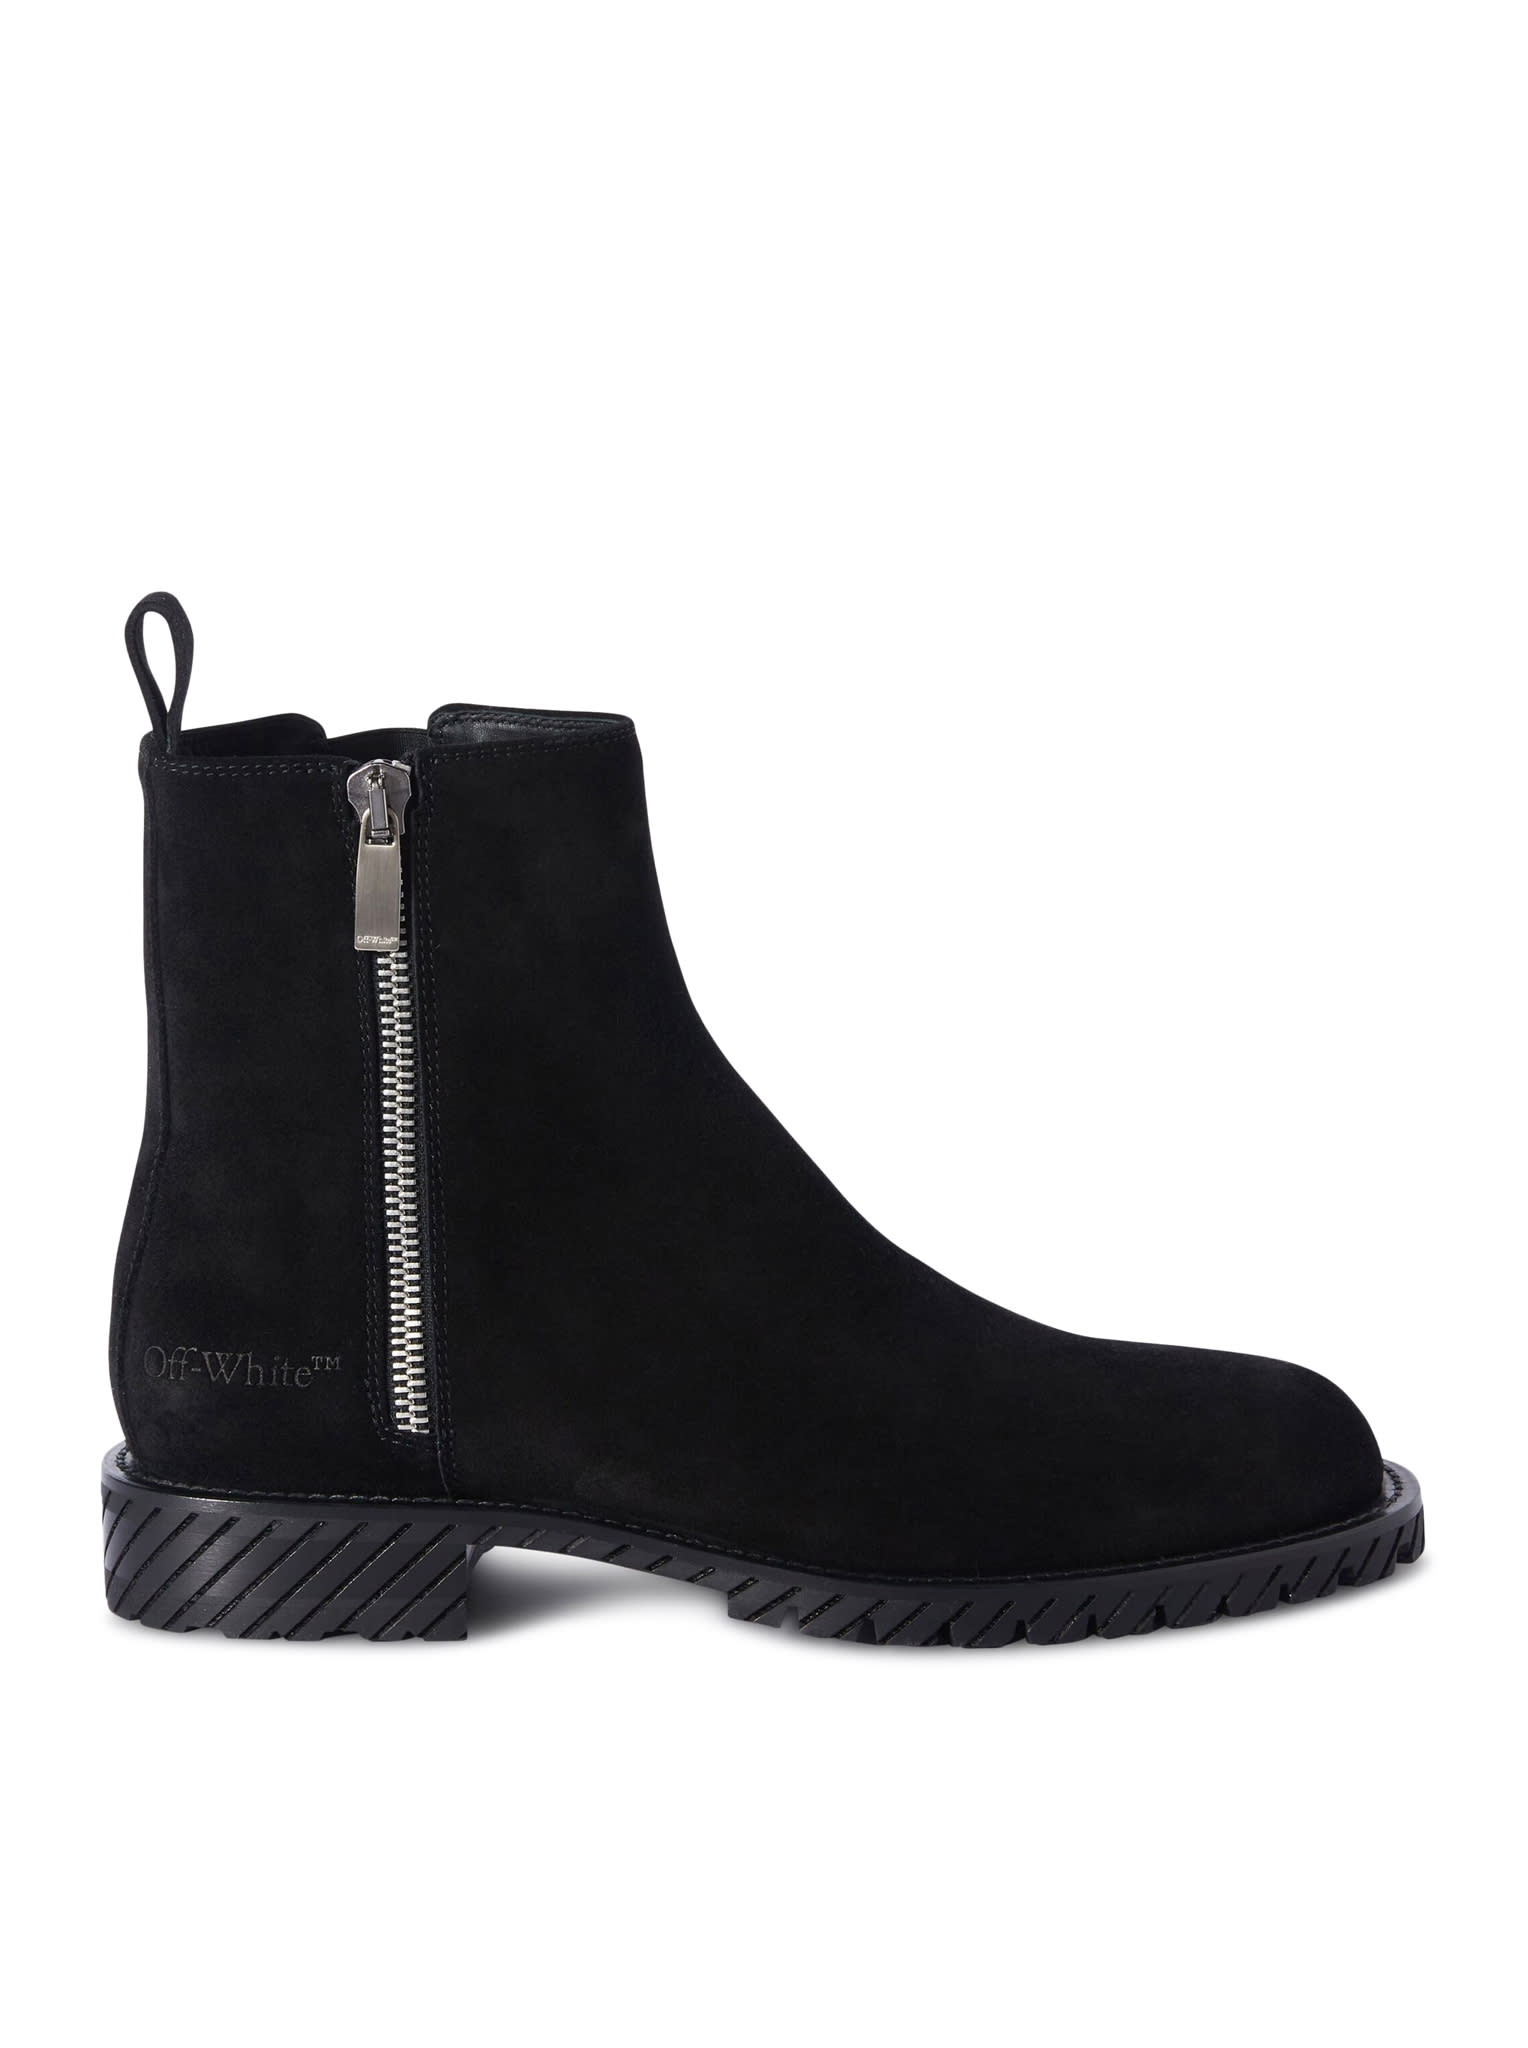 OFF-WHITE MILITARY SUEDE ANKLE BOOT BLACK